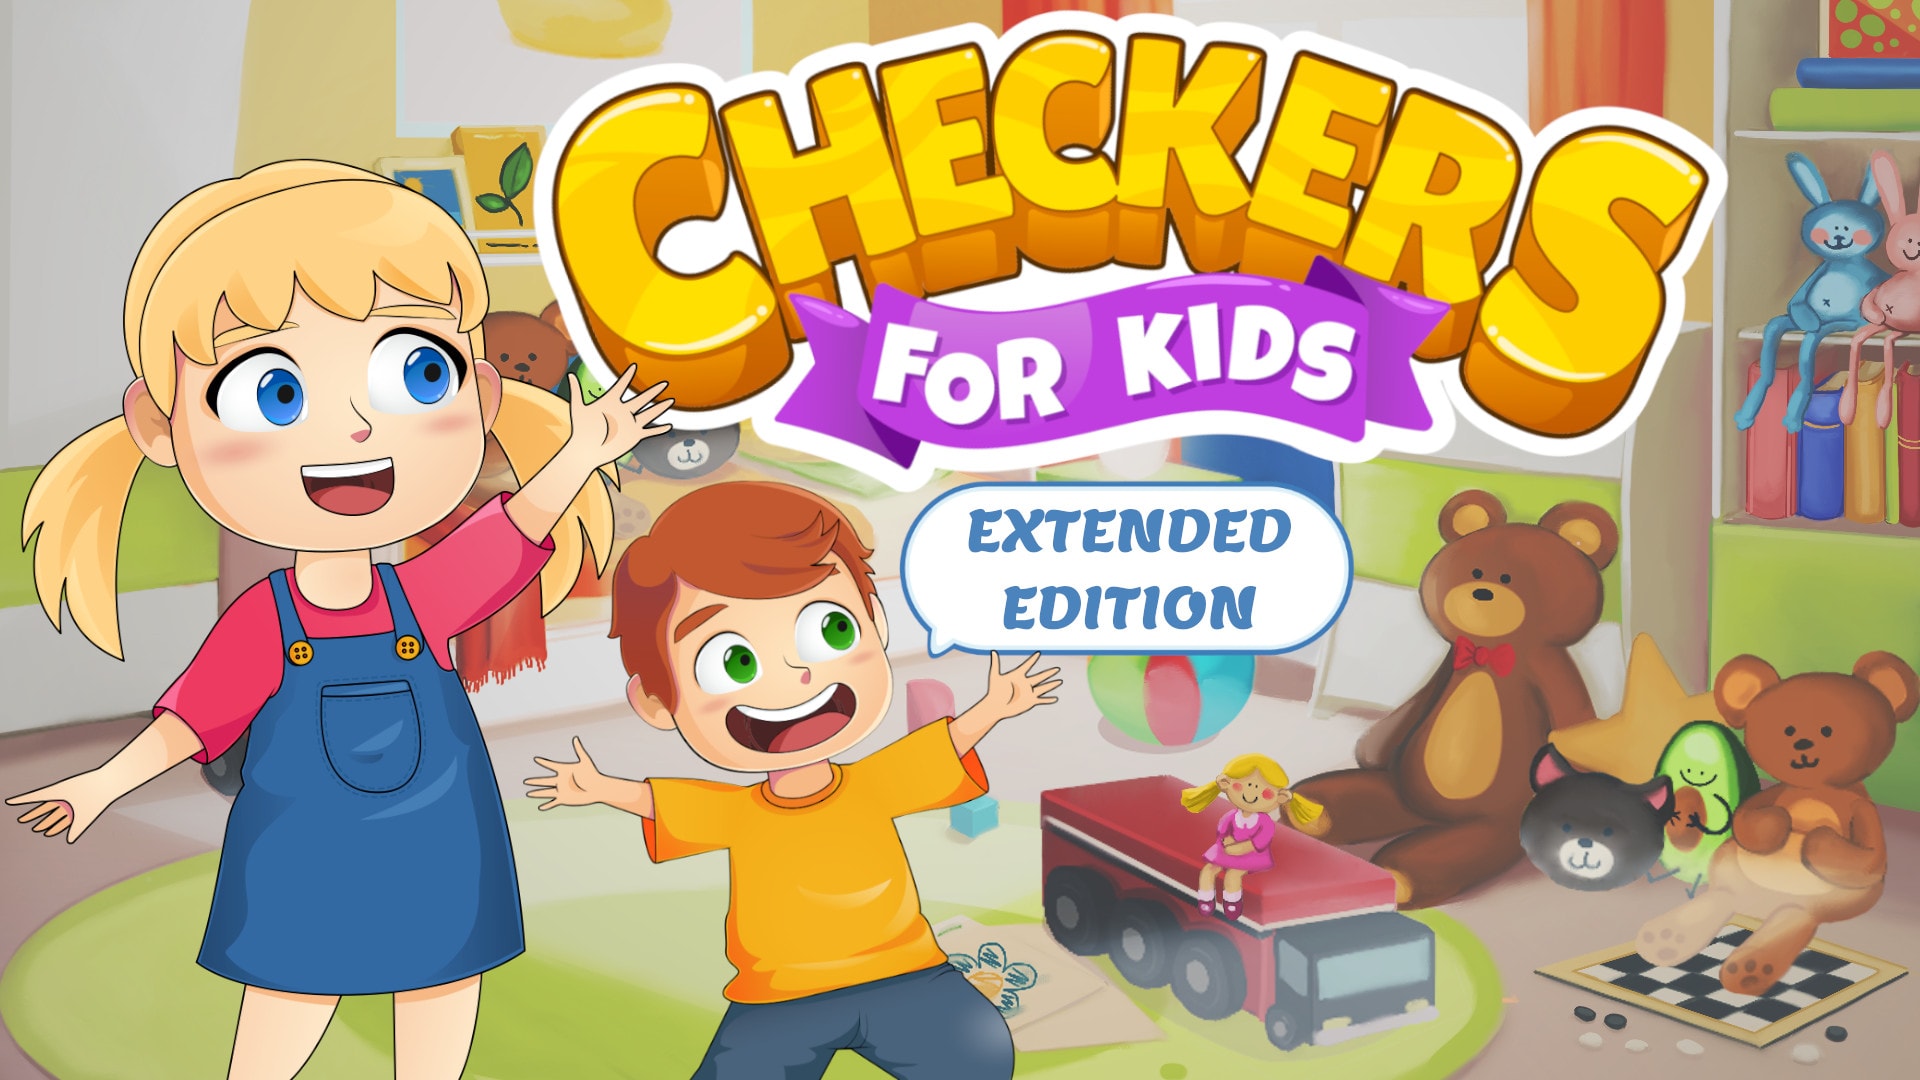 Checkers for Kids Extended Edition